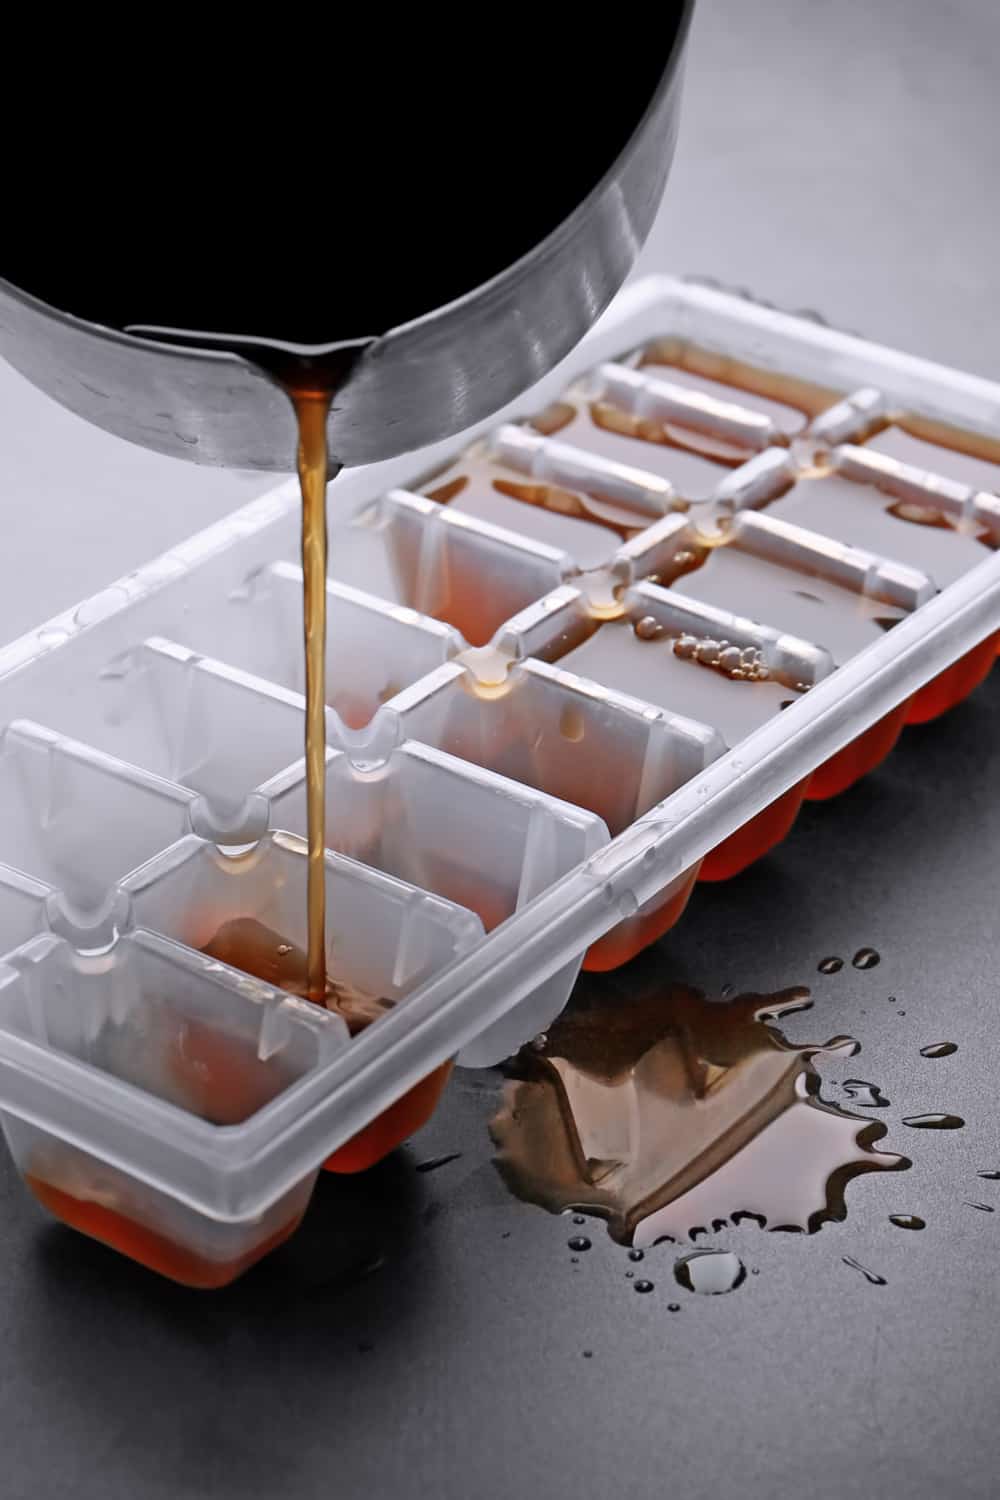 Prepare your ice – if you’re using a K-cup for hot coffee